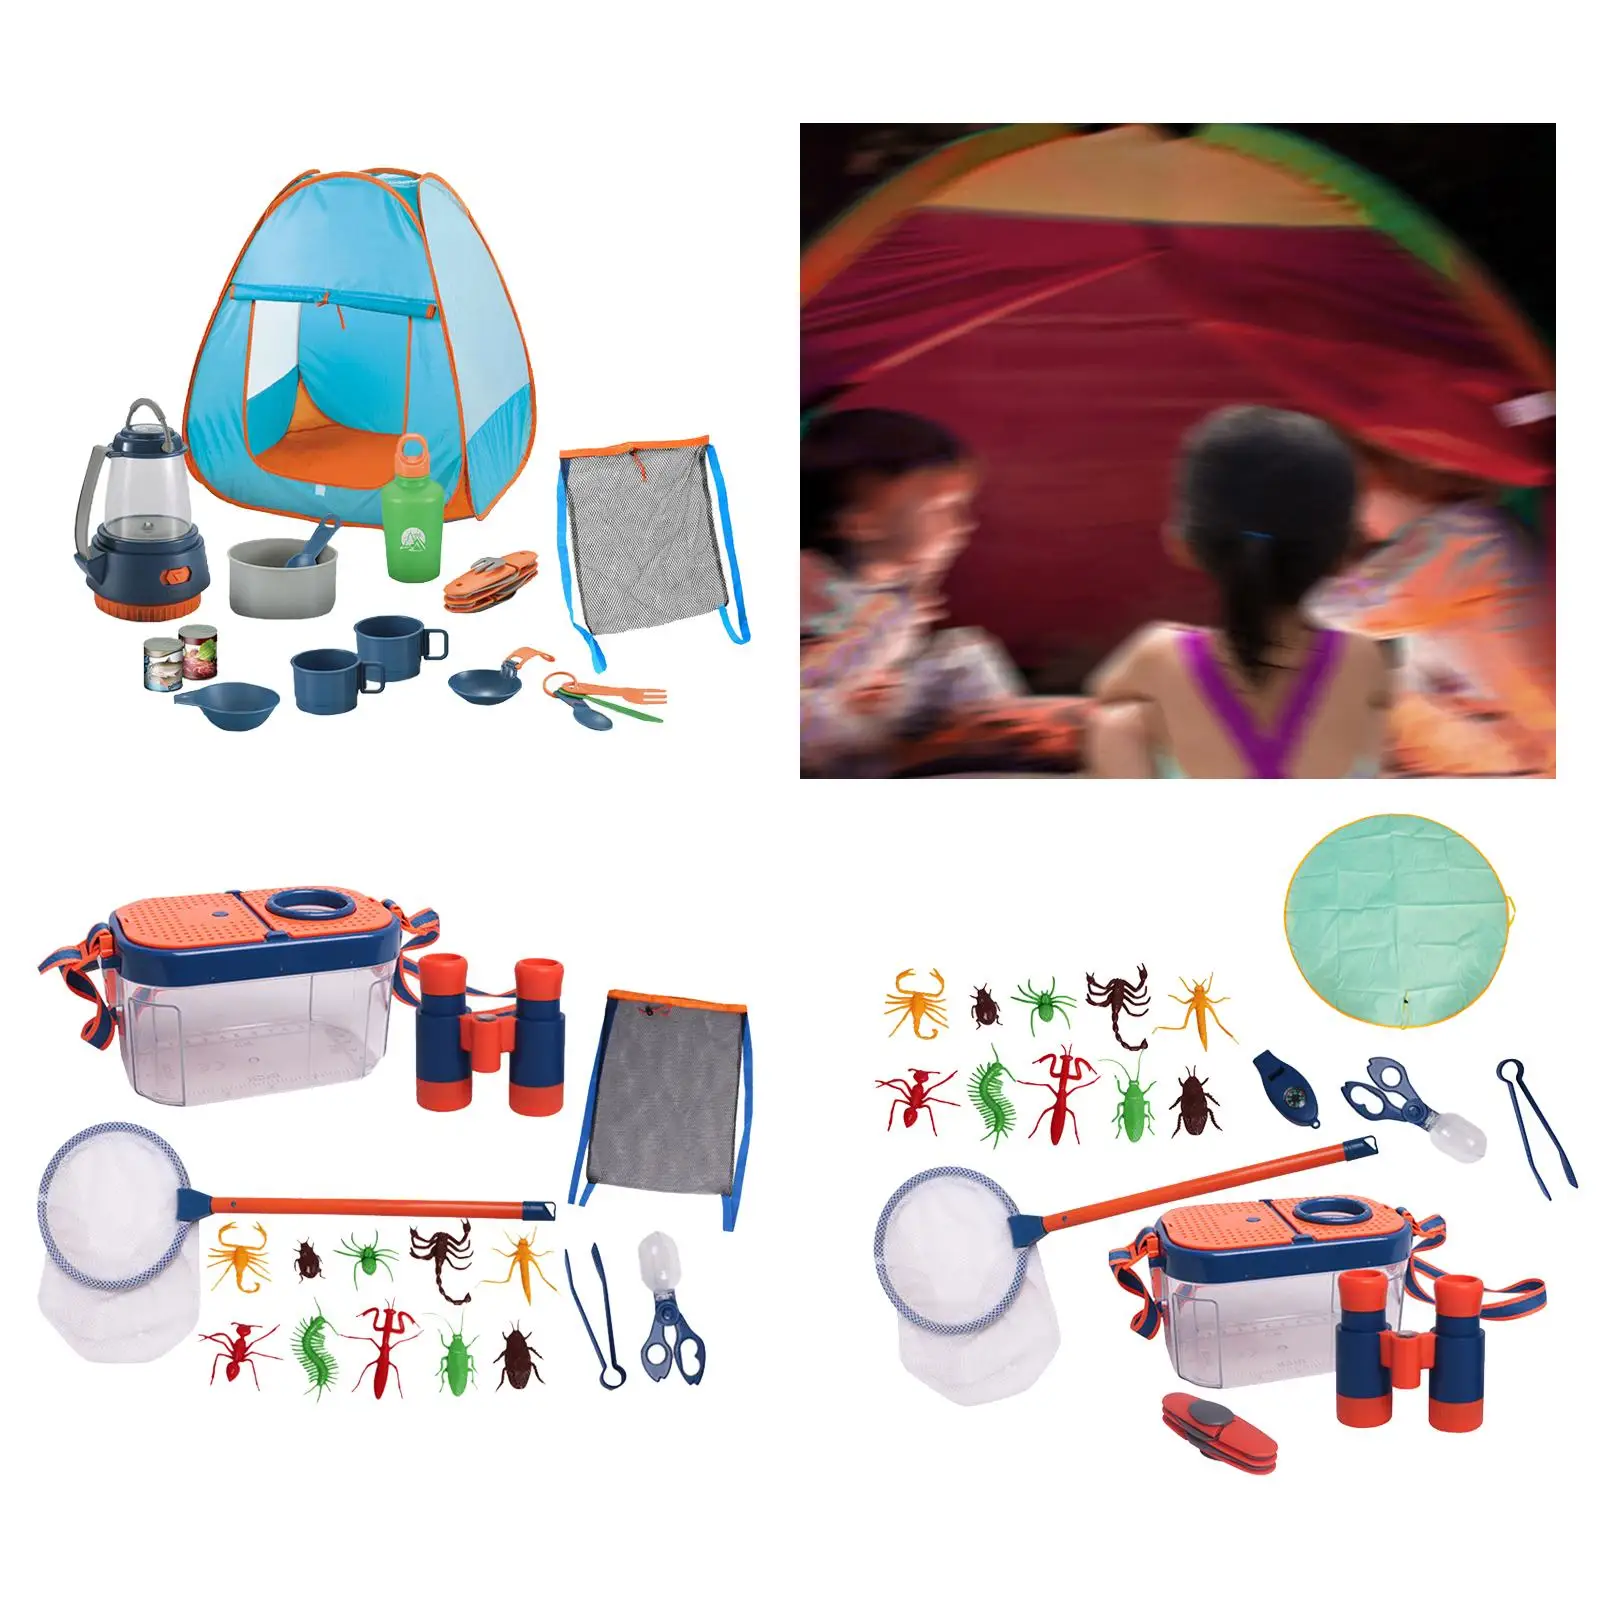 Kids Pretend Play Toys Set Lightweight Outdoor Adventure Toy Educational Learning Toys for Outdoor Boys Party Indoor Girls